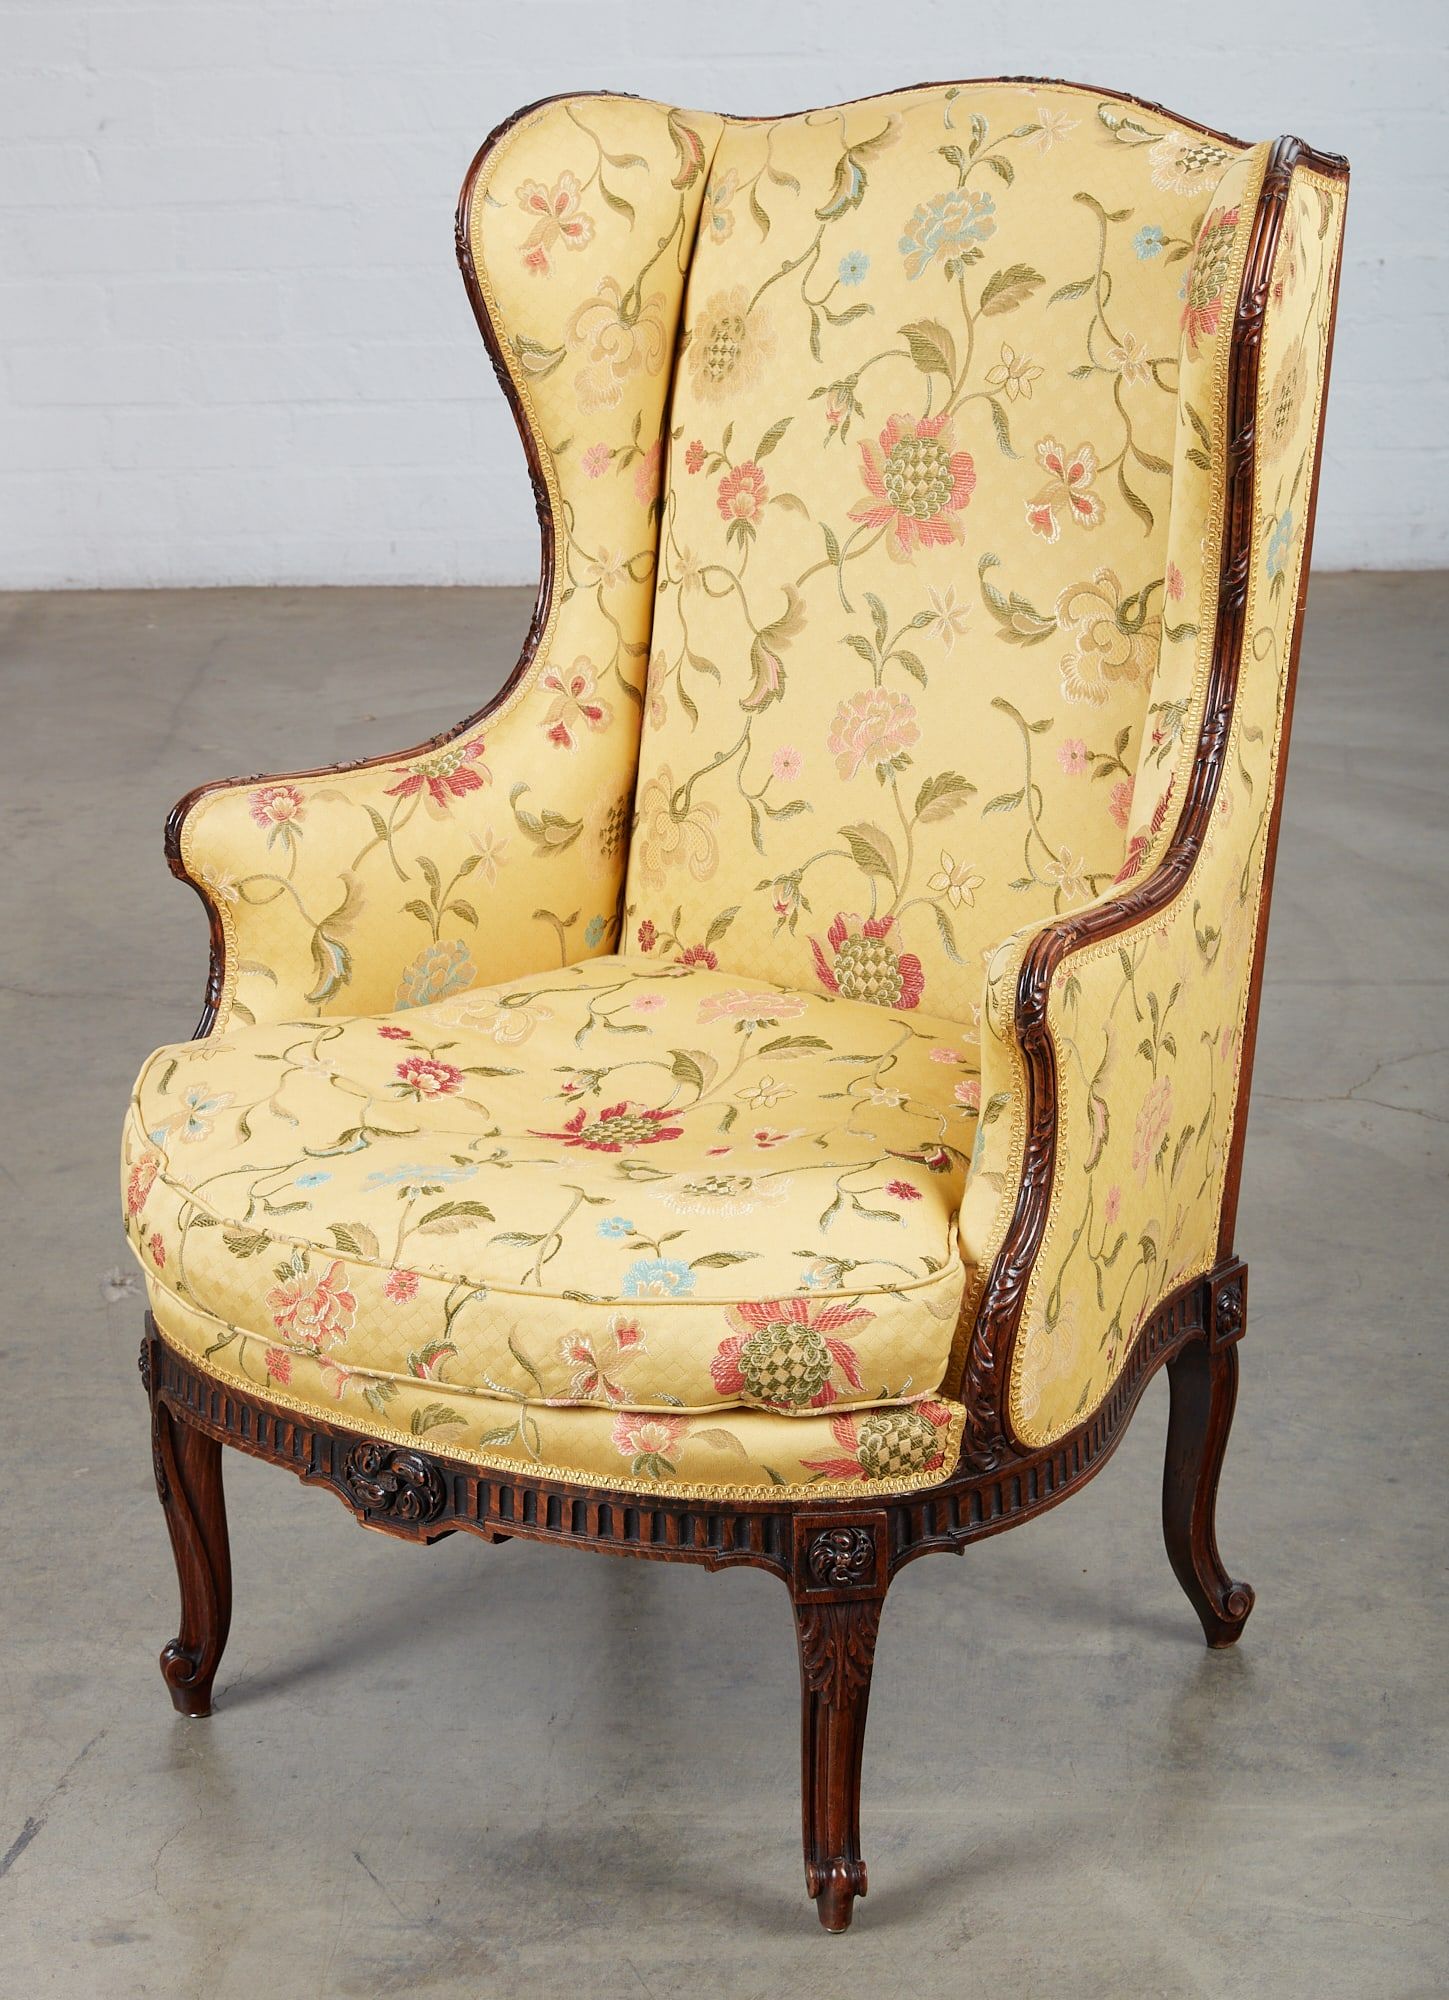 A LOUIS XV PROVINCIAL STYLE BERGERE